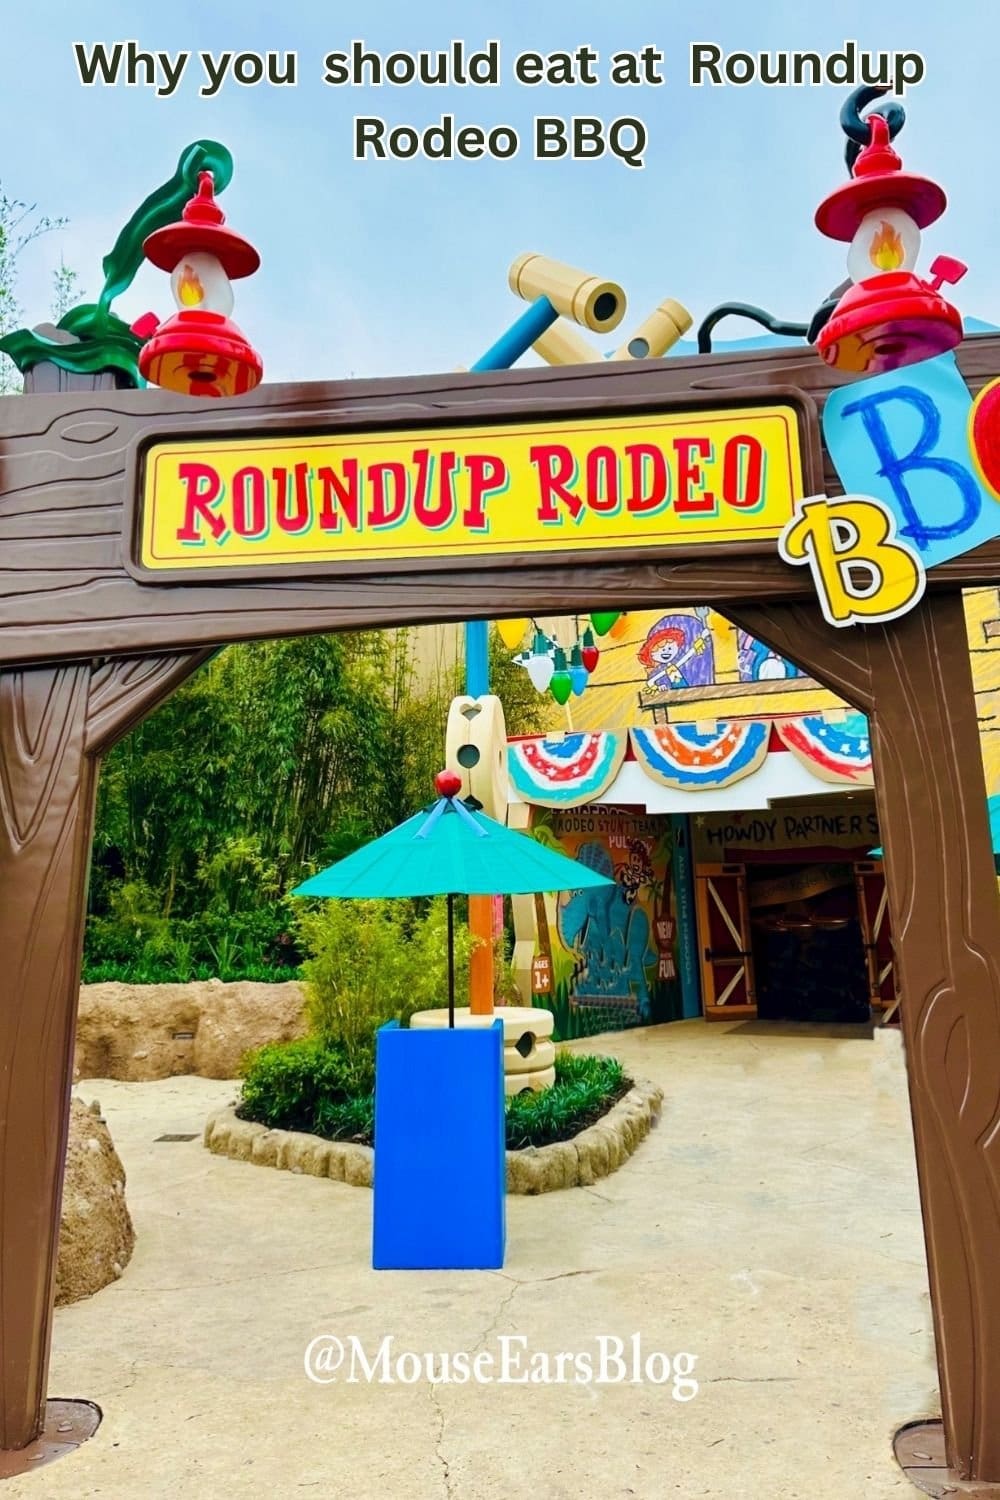 Experience the EXCITEMENT at Roundup Rodeo BBQ